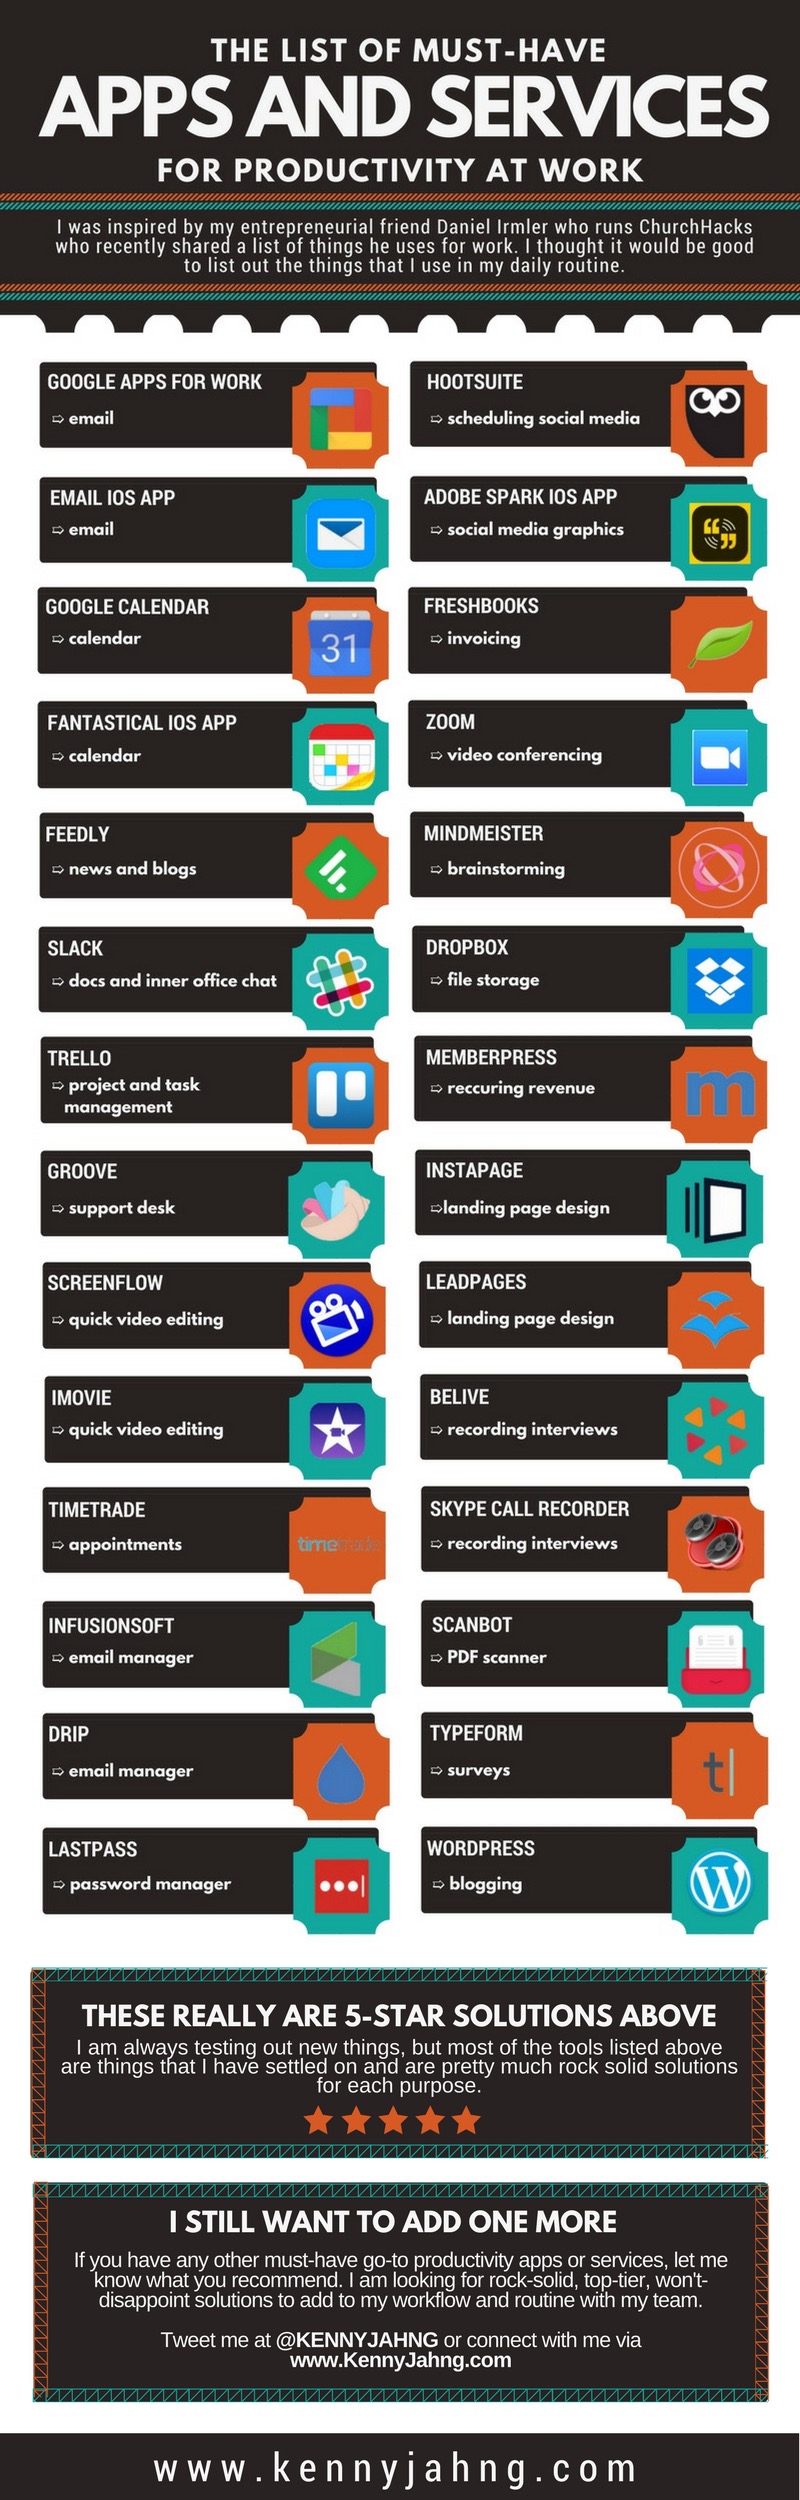 Work productivity apps list infographic